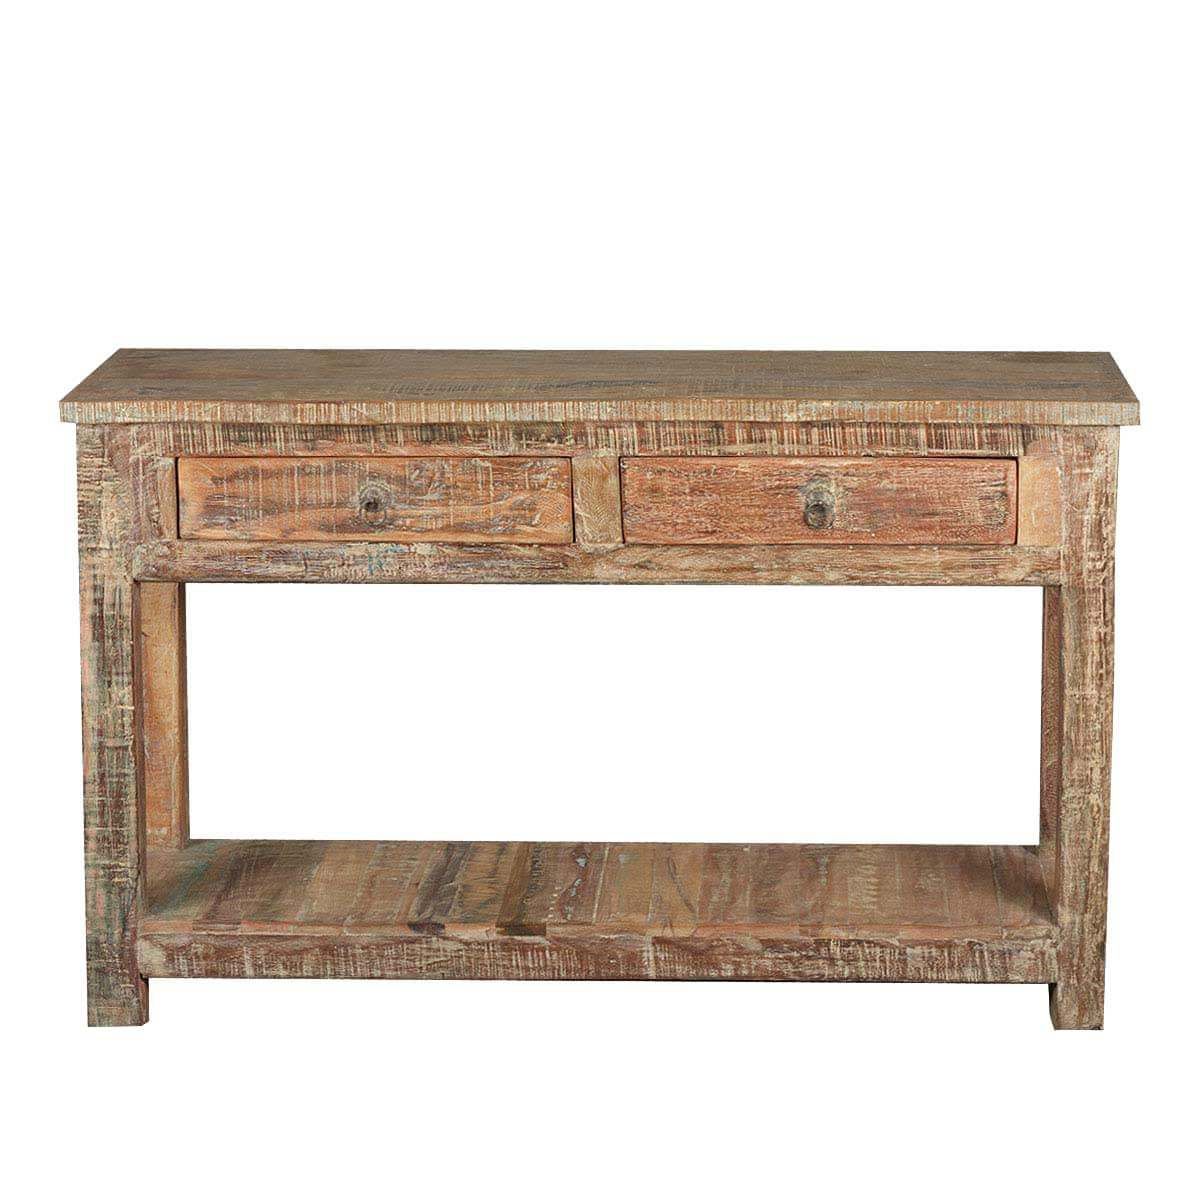 Reclaimed Wood Console Tables Throughout Well Known Rustic Reclaimed Wood Naturally Distressed Hall Console Table (View 10 of 10)